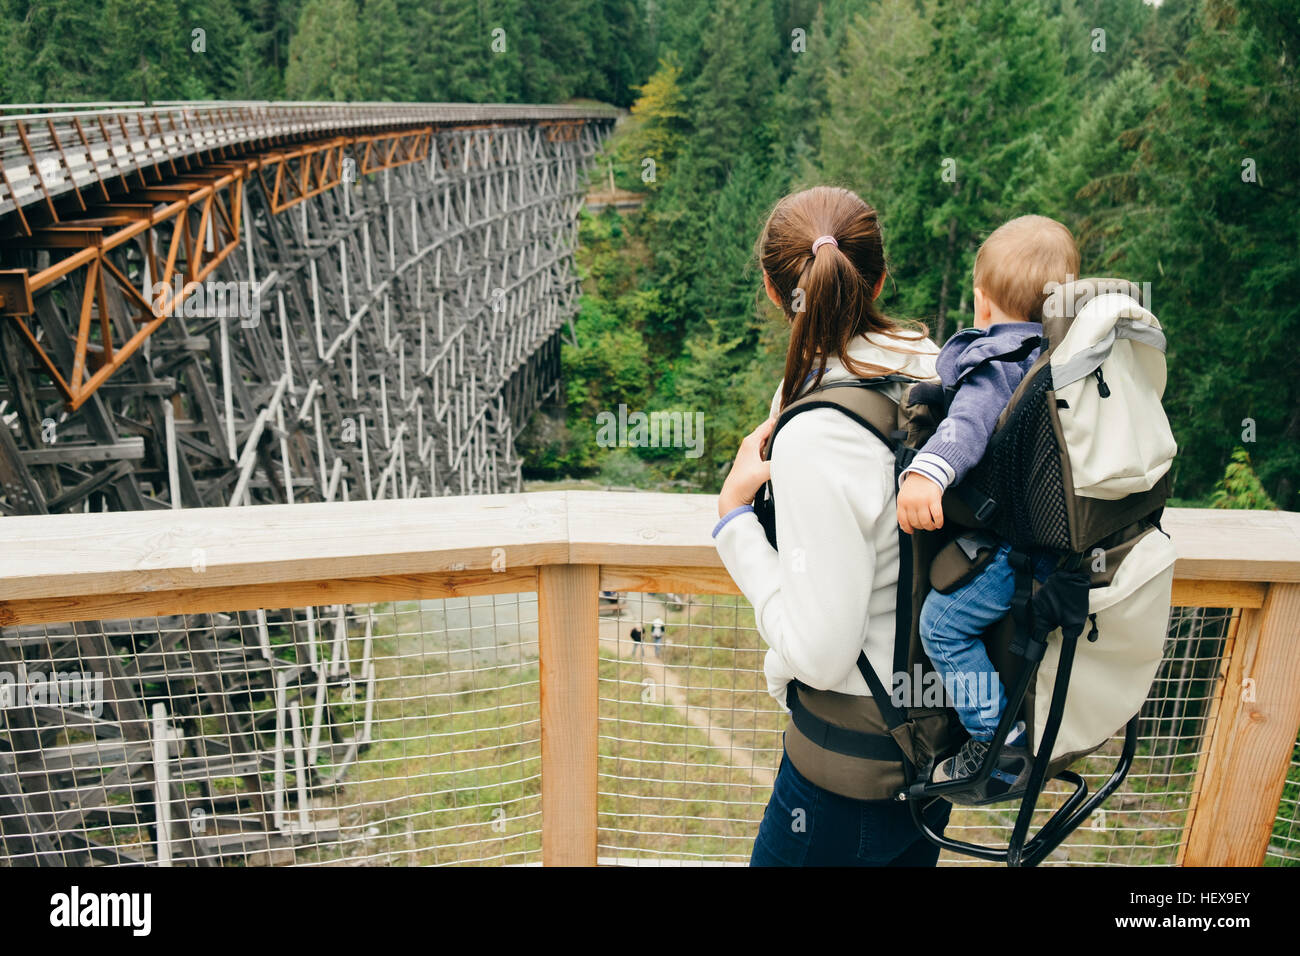 Young woman carrying son on back, rear view, Kinsol Trestle Bridge, British Columbia, Canada Stock Photo